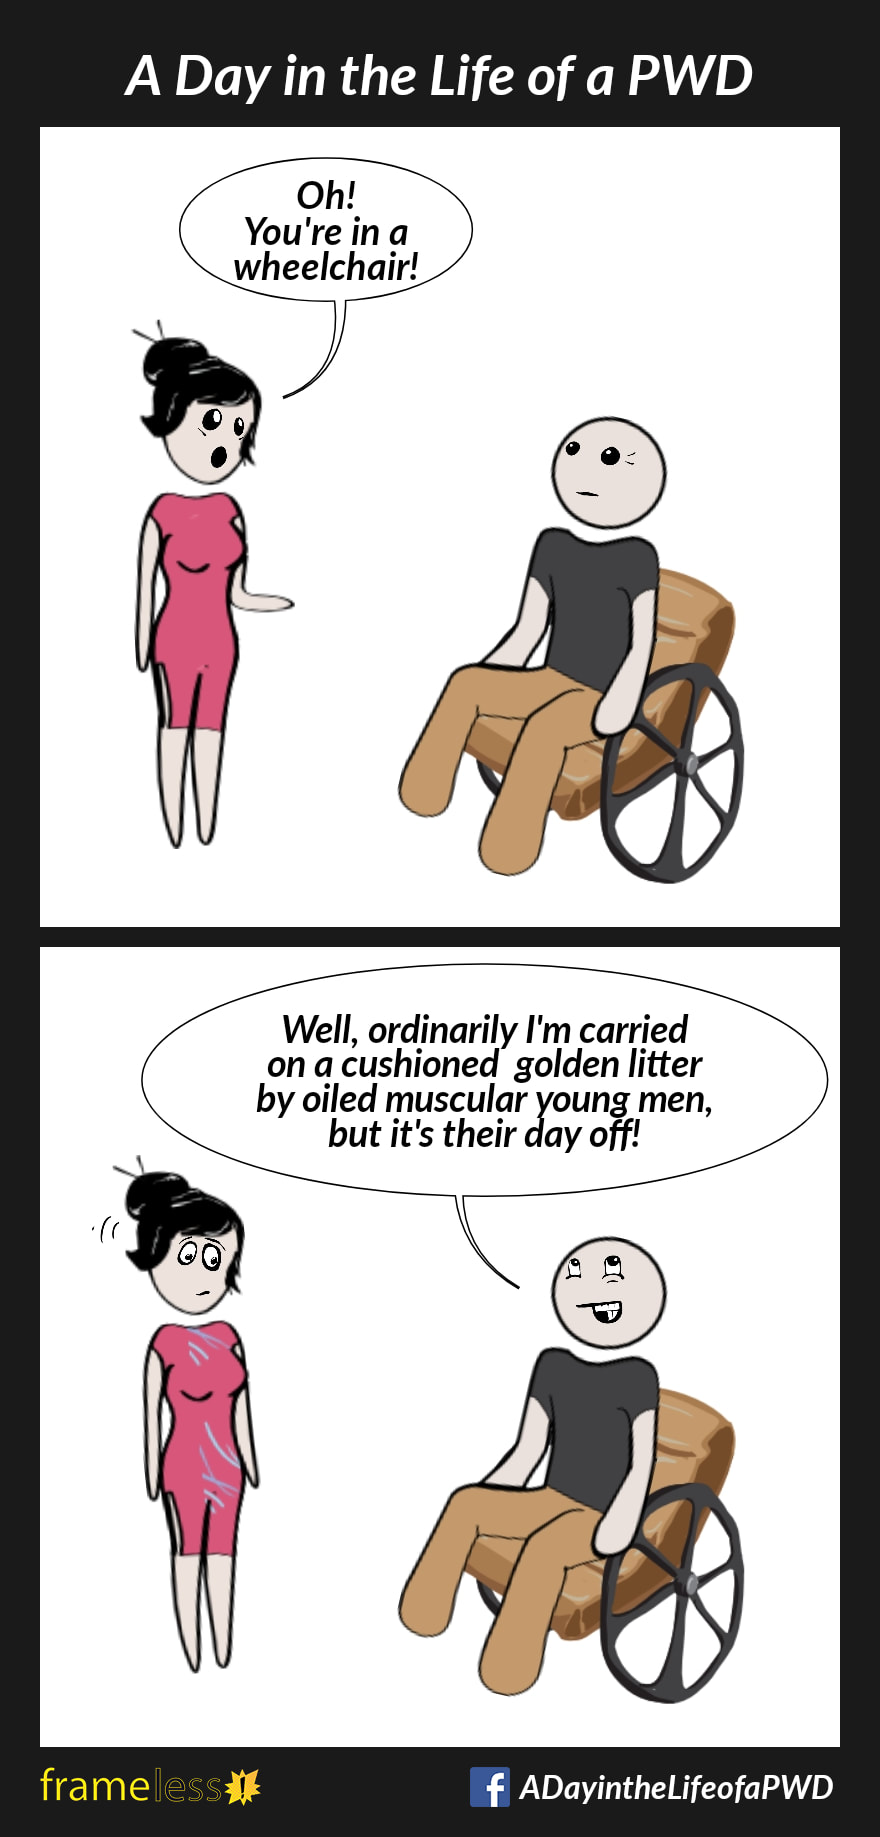 COMIC STRIP 
A Day in the Life of a PWD (Person With a Disability) 

Frame 1:
A man in a wheelchair meets with a woman.
WOMAN: Oh! You're in a wheelchair!

Frame 2:
MAN: Well, ordinarily I am carried on a cushioned golden litter by oiled muscular young men, but it's their day off!